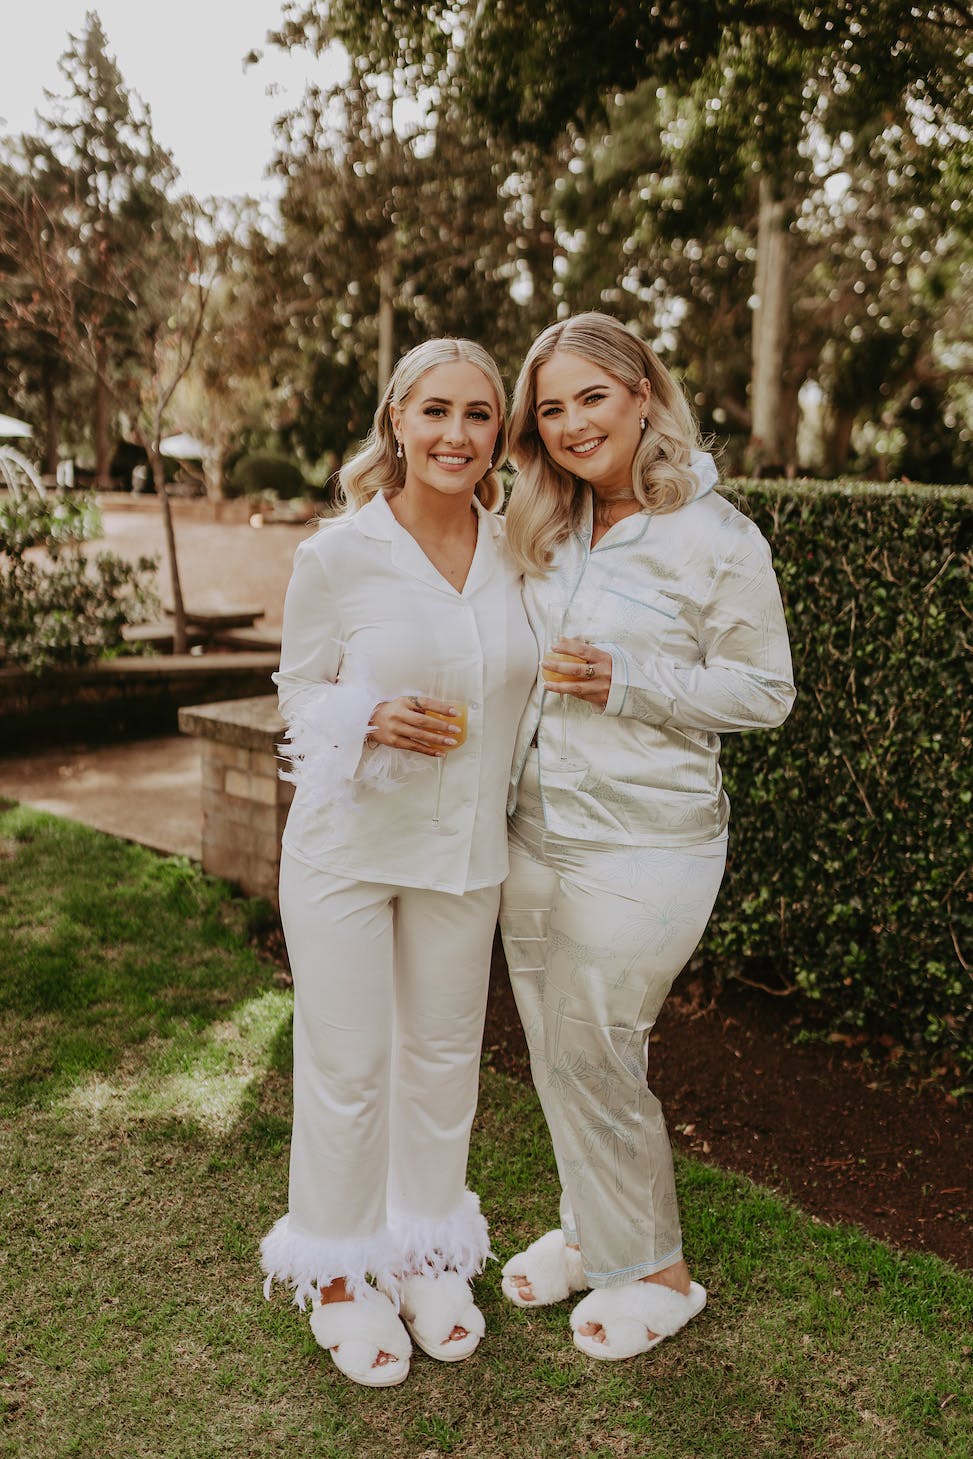 Two smiling women stand outside on grass, wearing coordinated white pajama sets. One has feathered cuffs on her pants and the other is in satin pajamas. They each hold a drink in one hand and appear relaxed. Greenery and tree-lined background is visible.